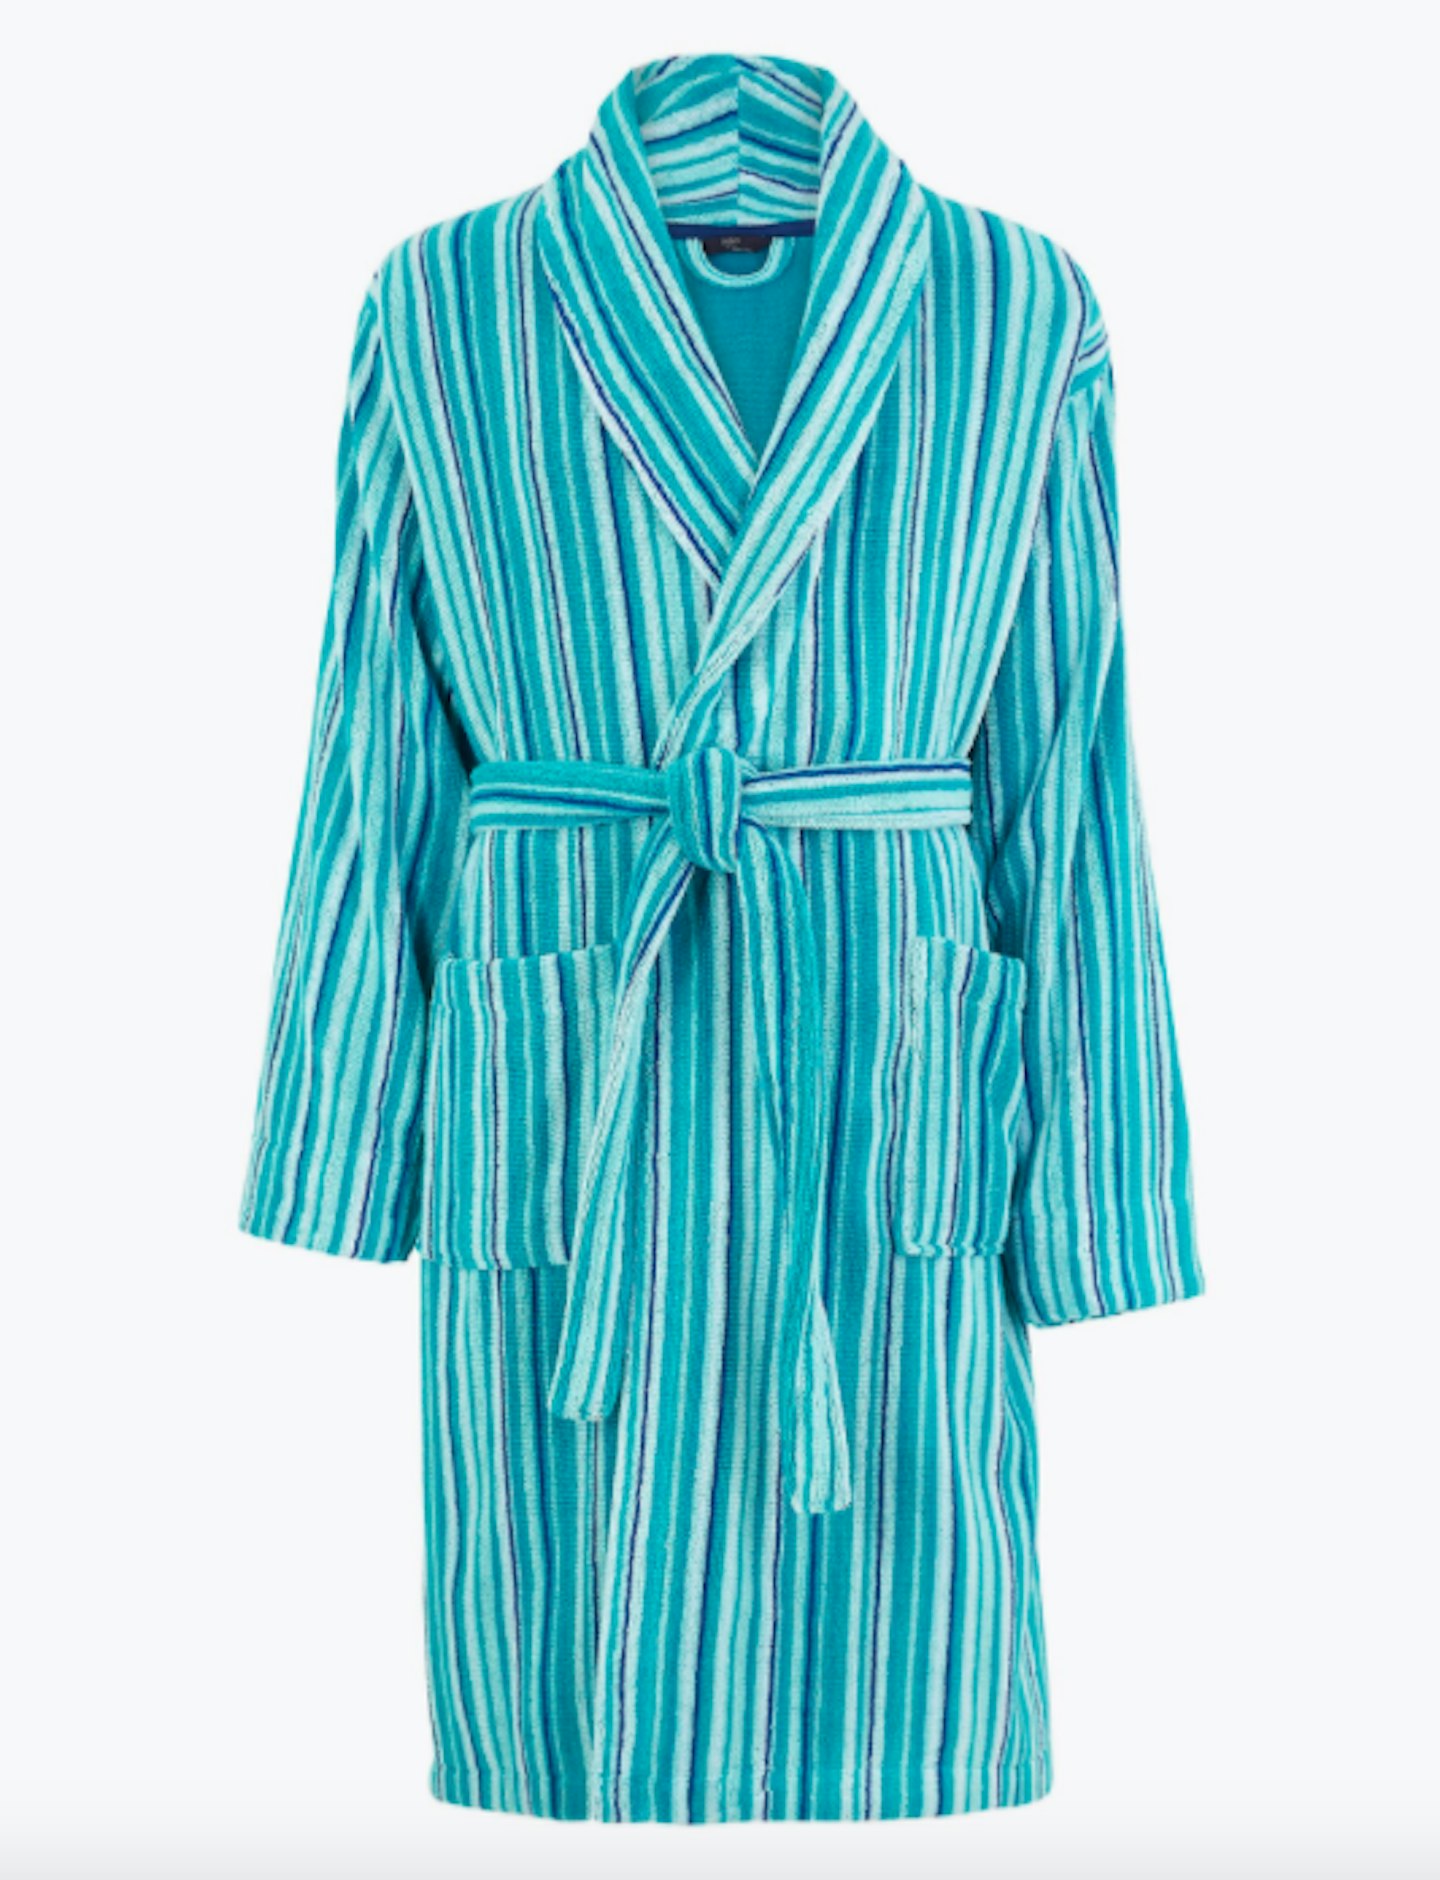 M&S Collection, Cotton Striped Towelling Dressing Gown, £49.50